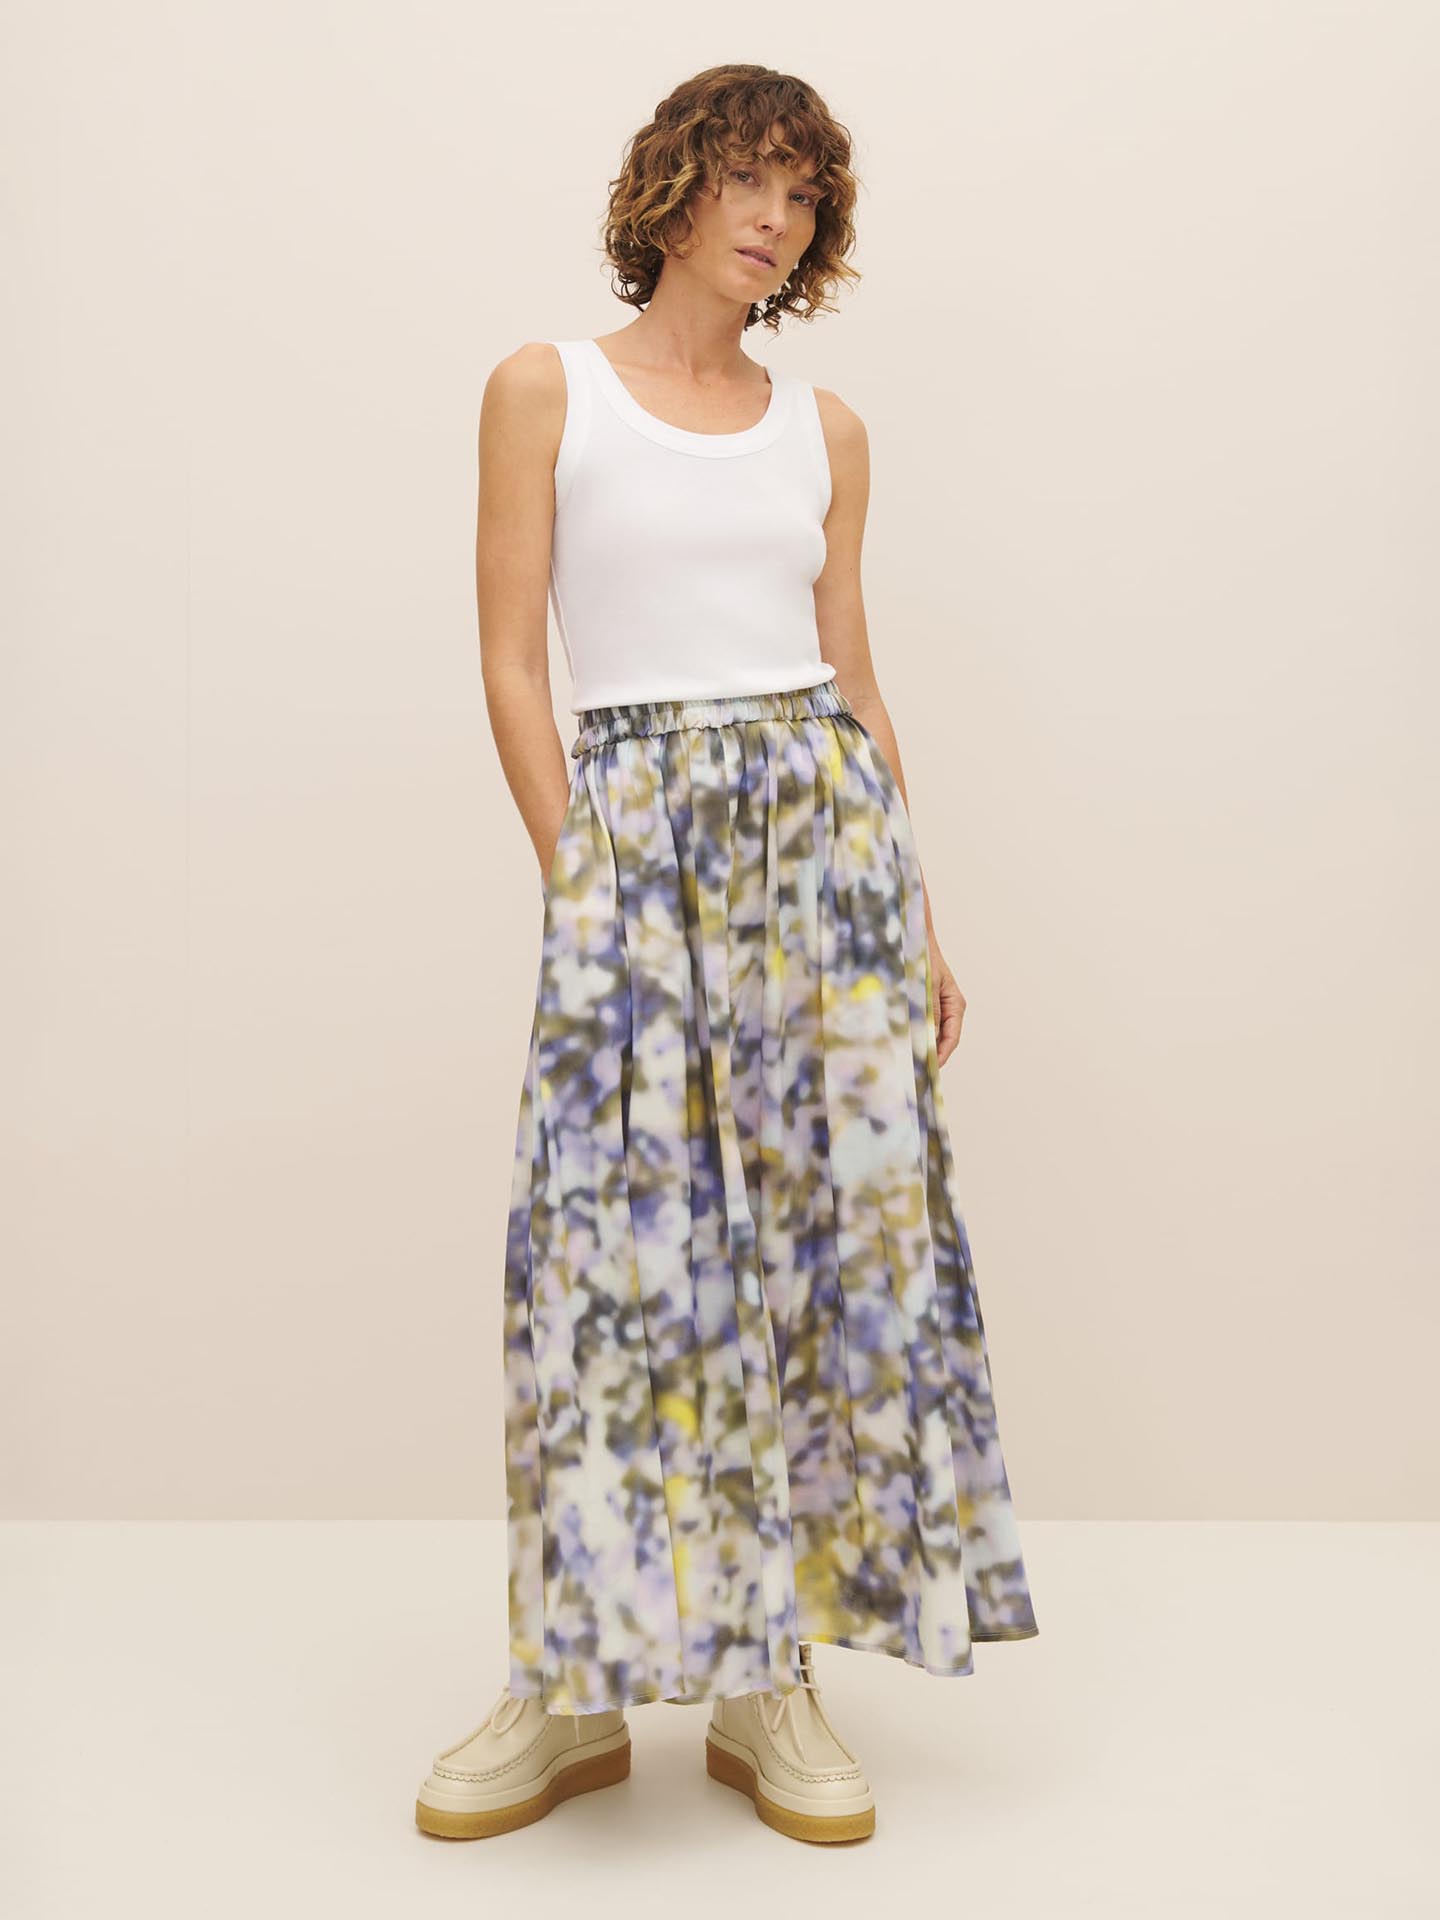 A woman in a lightweight organic cotton voile floral Muse Skirt – Komorebi by Kowtow.